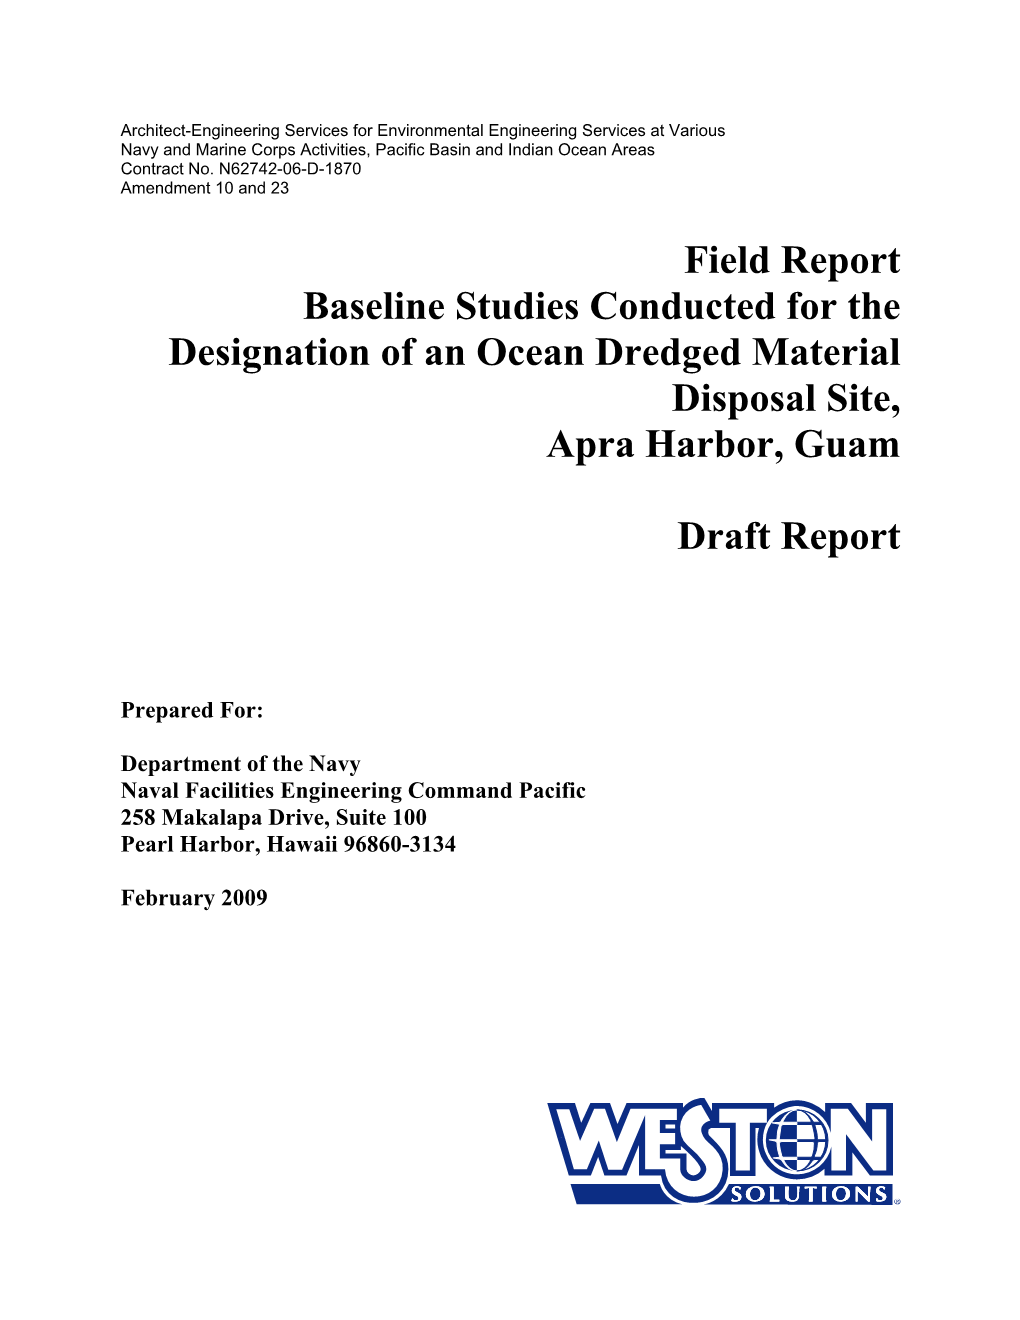 Field Report: Baseline Studies Conducted for the Designation of an Ocean Dredged Material Disposal Site, Apra Harbor, Guam